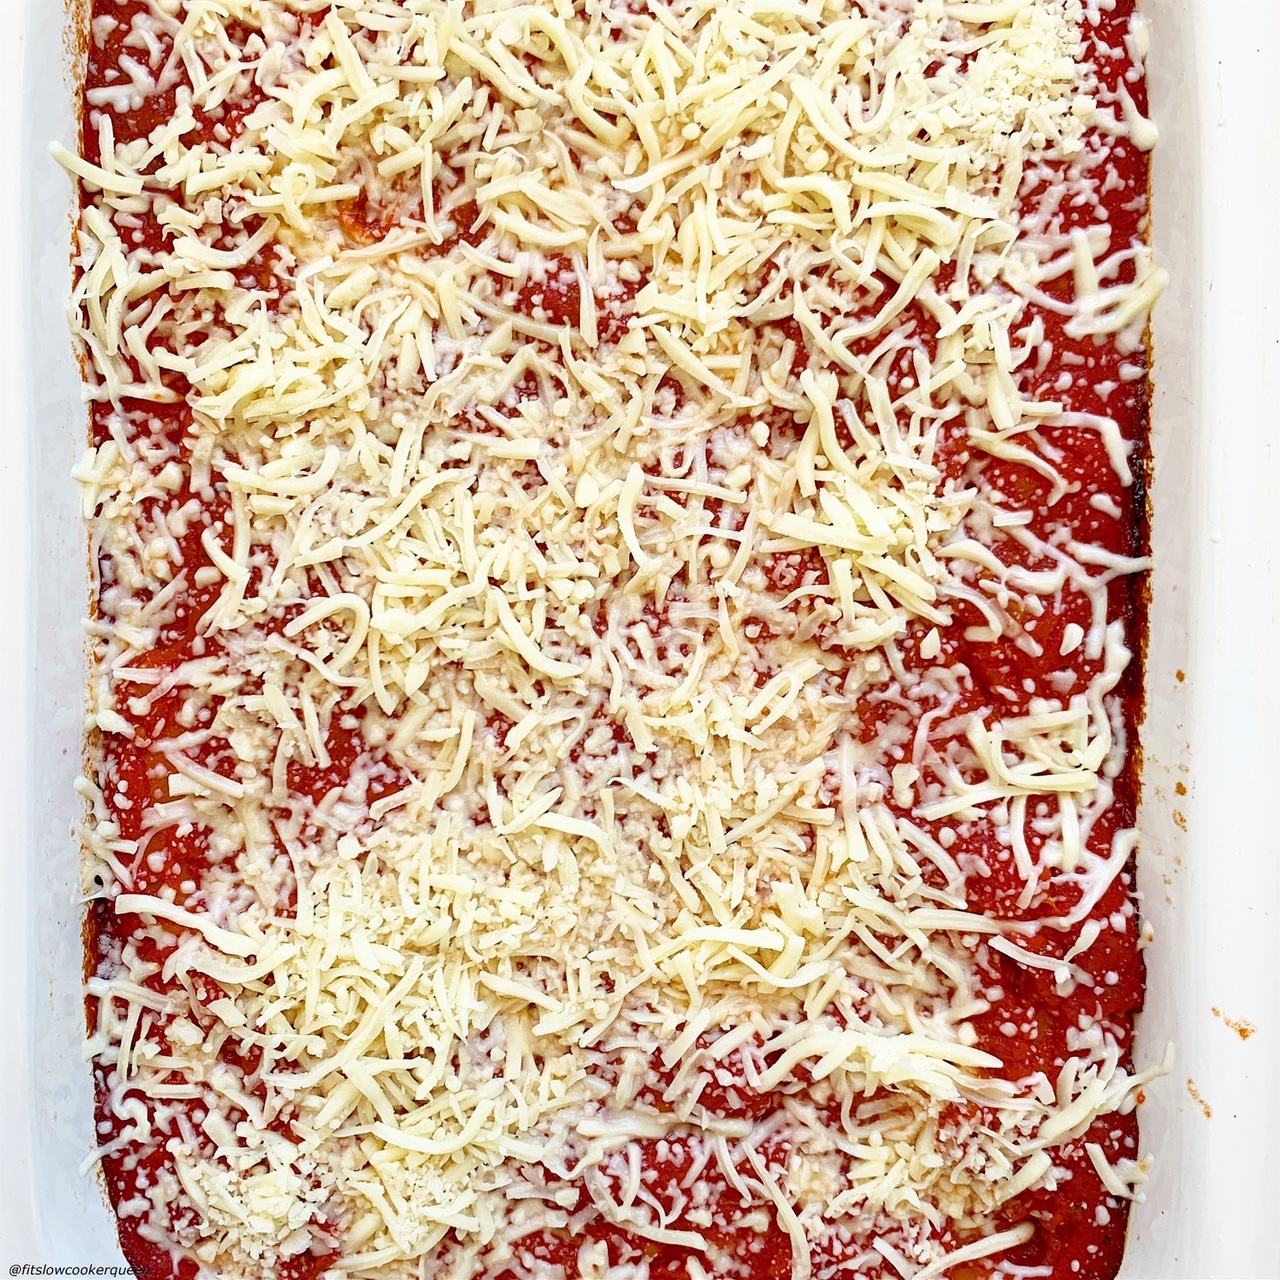 cooked manicotti with cheese added on top to cook some more for slow cooker or instant pot stuffed manicotti